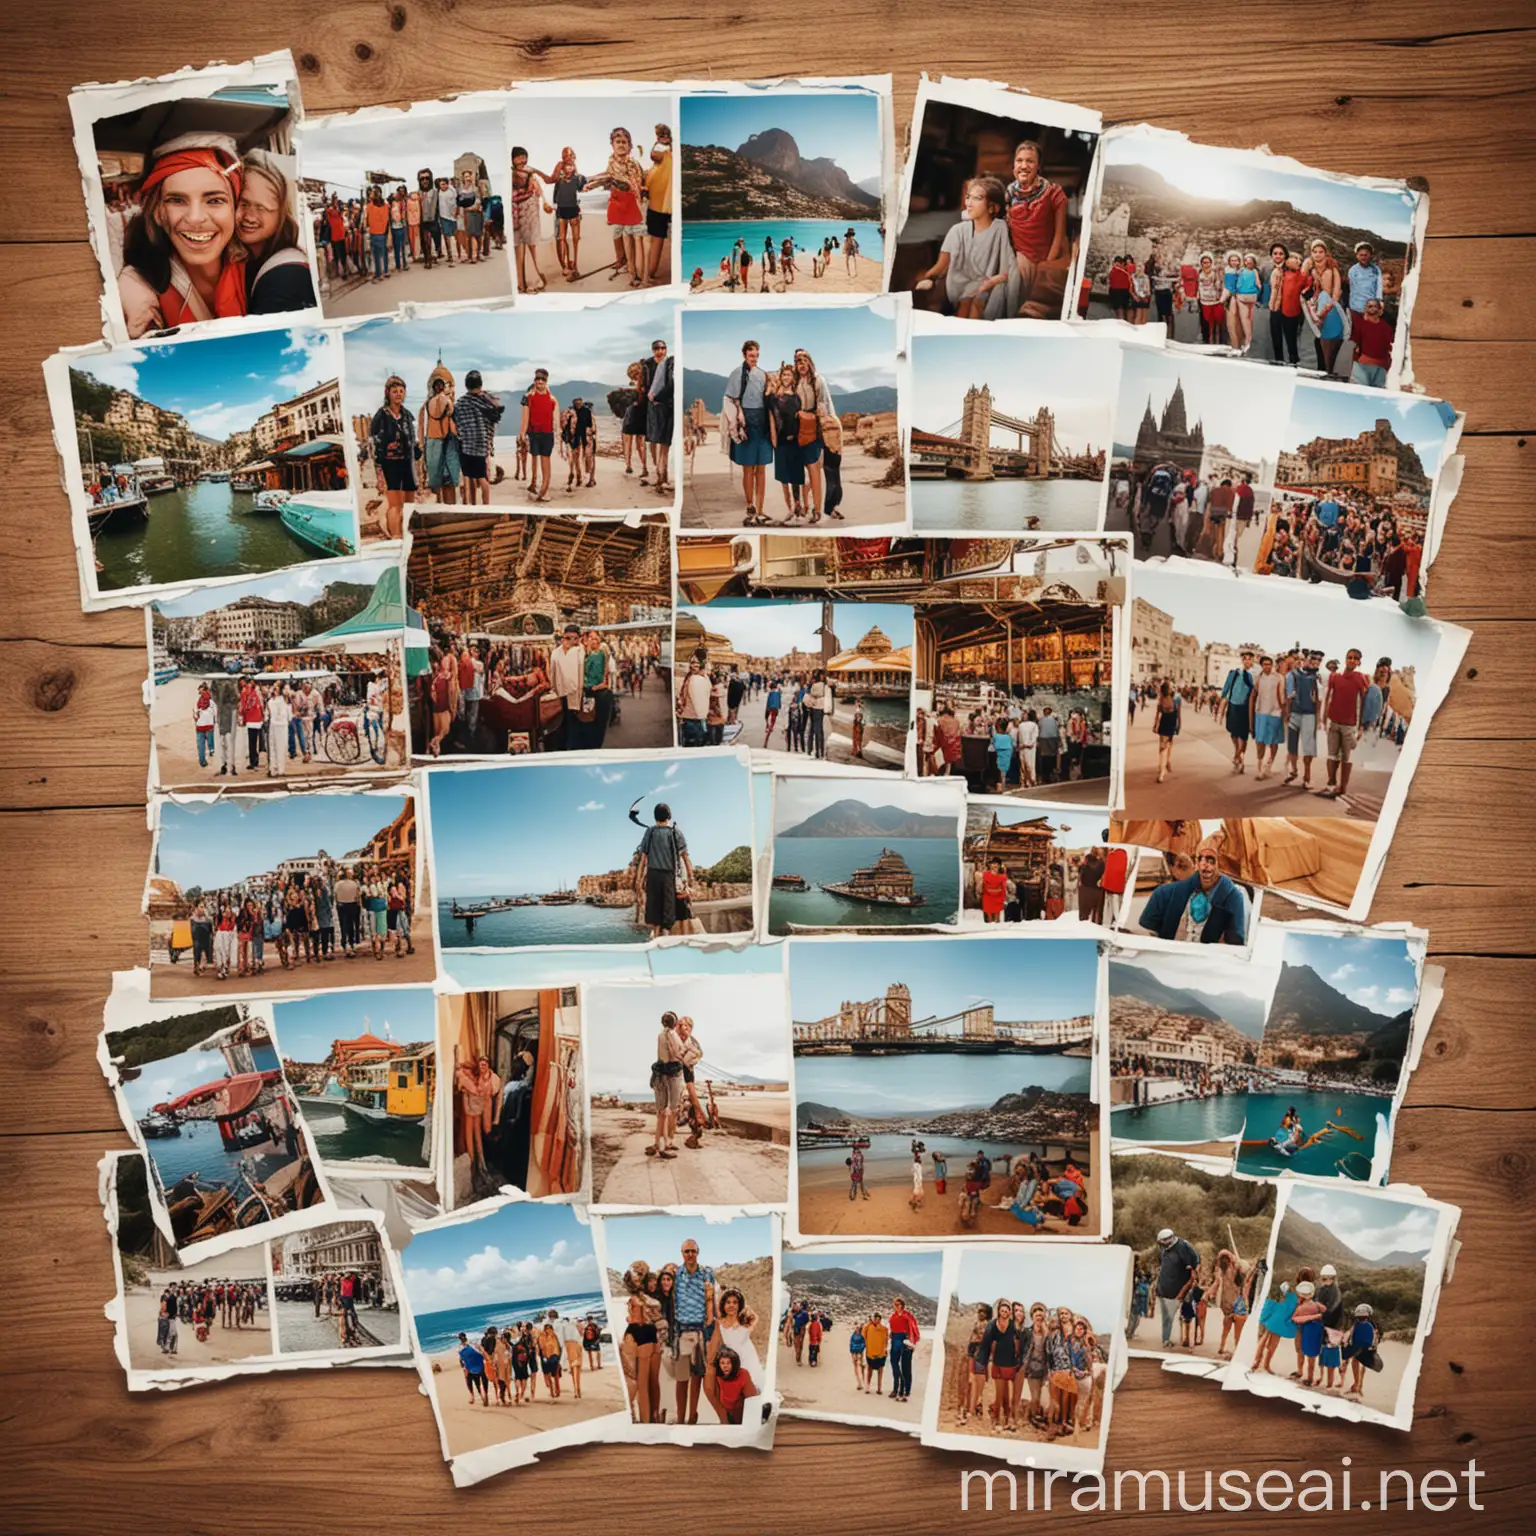 Heartwarming user-generated content featuring travel memories and unforgettable moments shared by the community.
